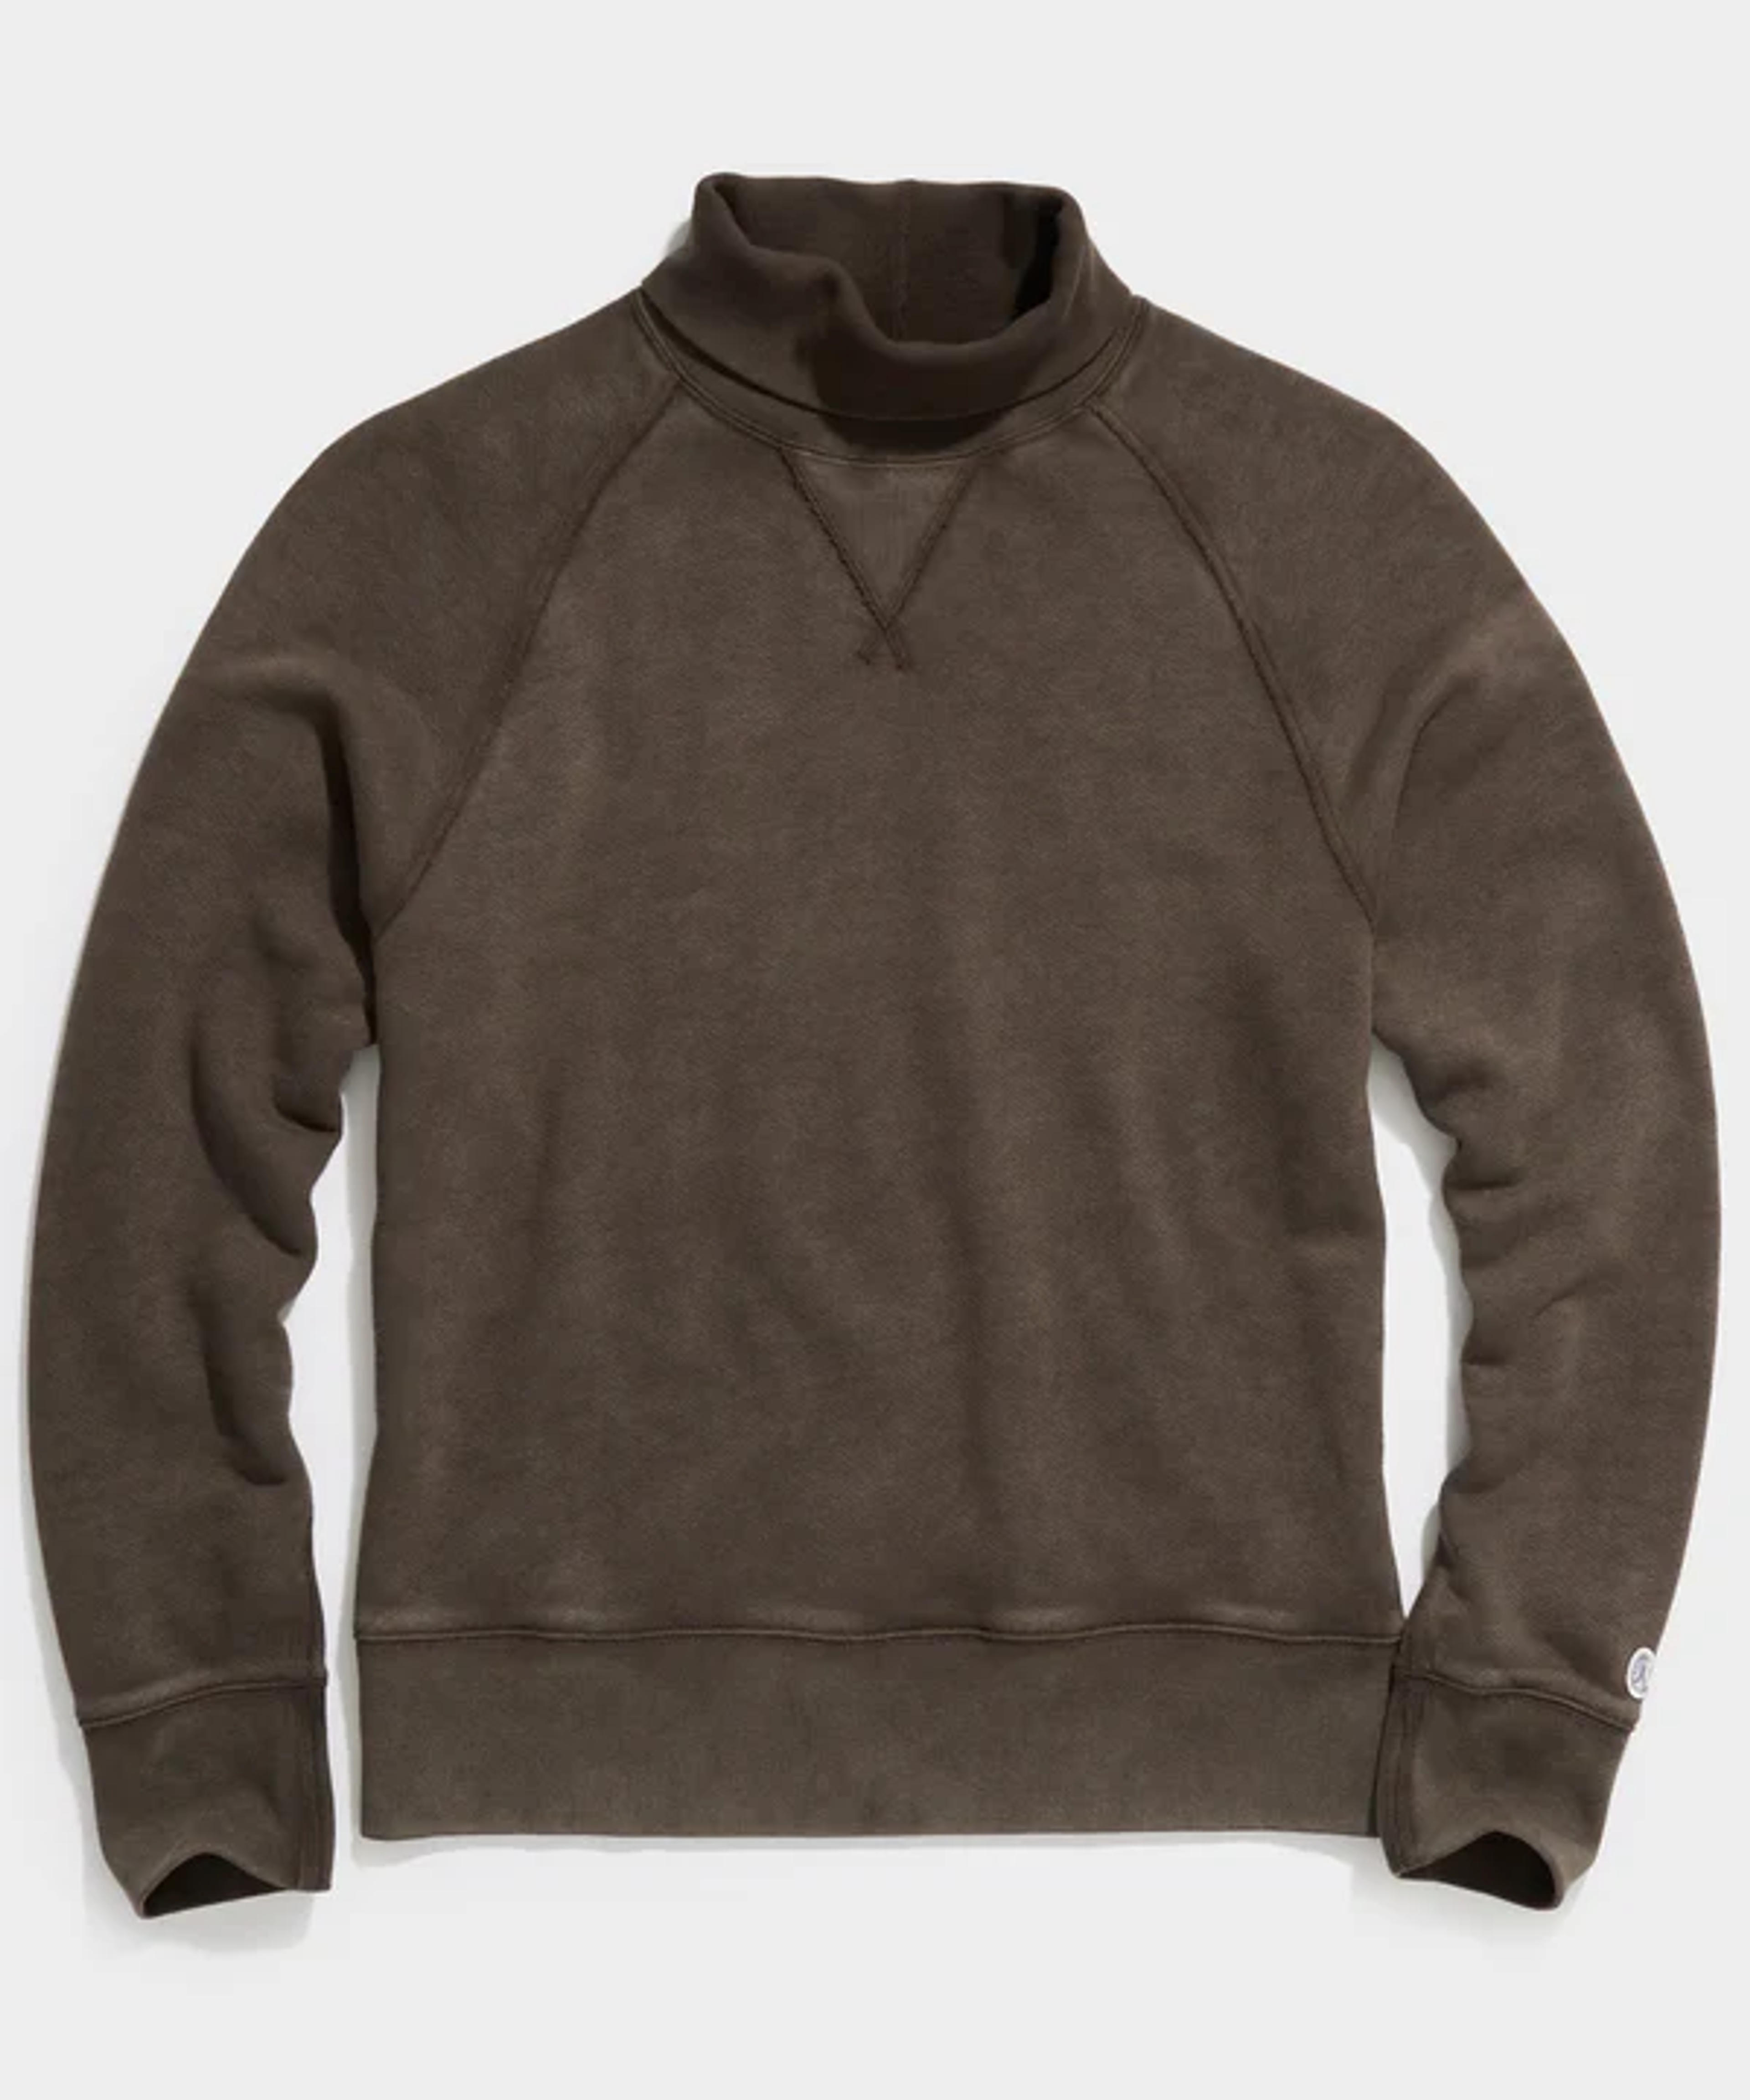 Sun-Faded Midweight Turtleneck Sweatshirt in Tabac - Todd Snyder